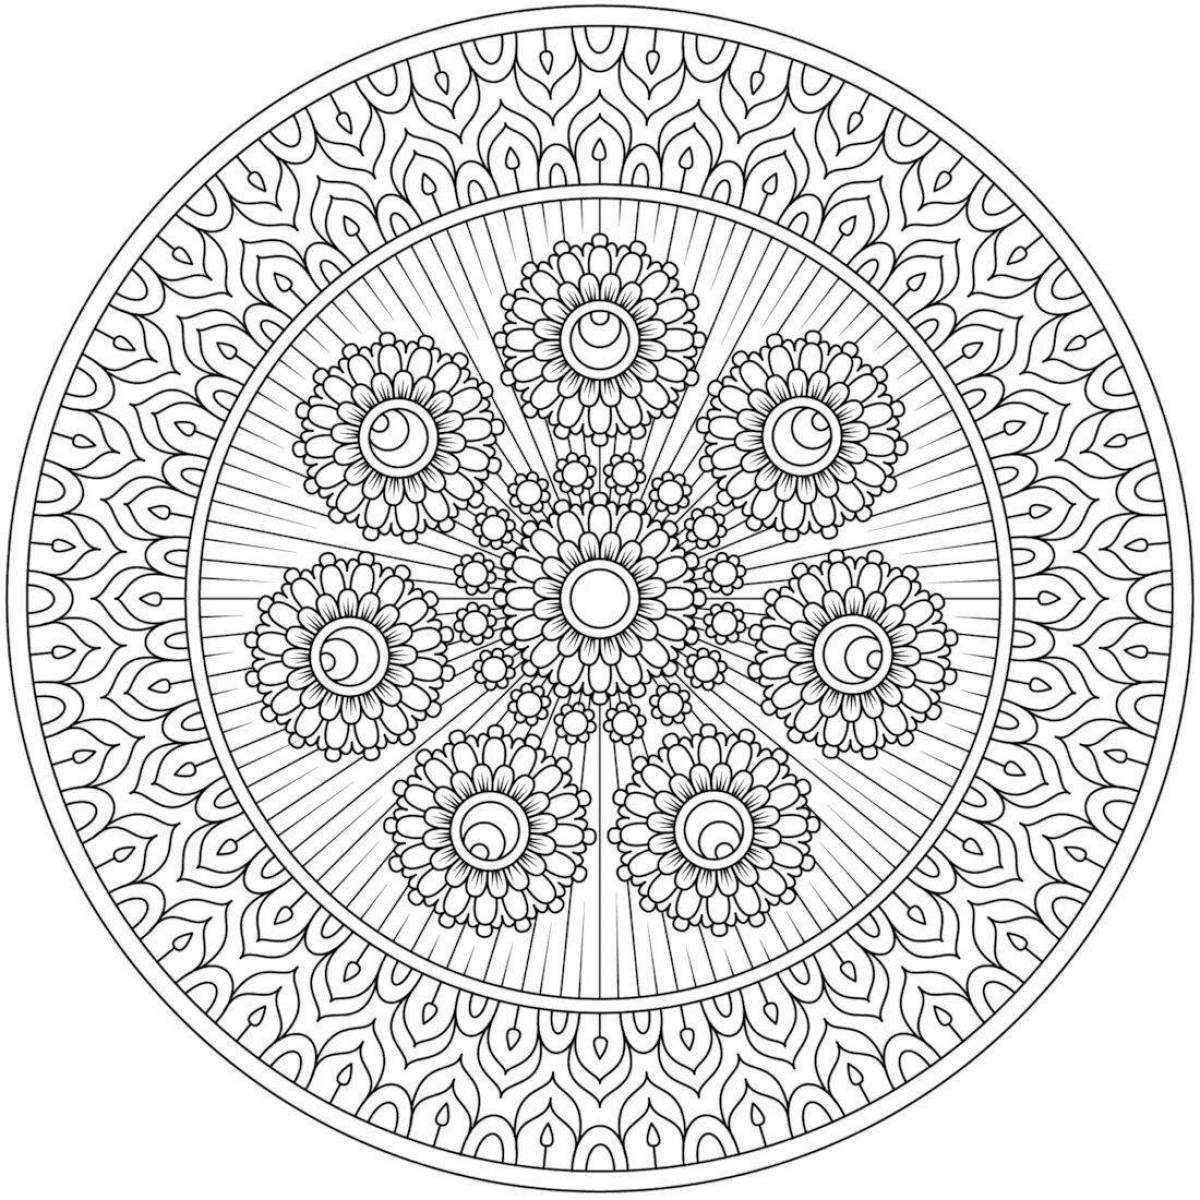 Celestial coloring mandala of peace and tranquility